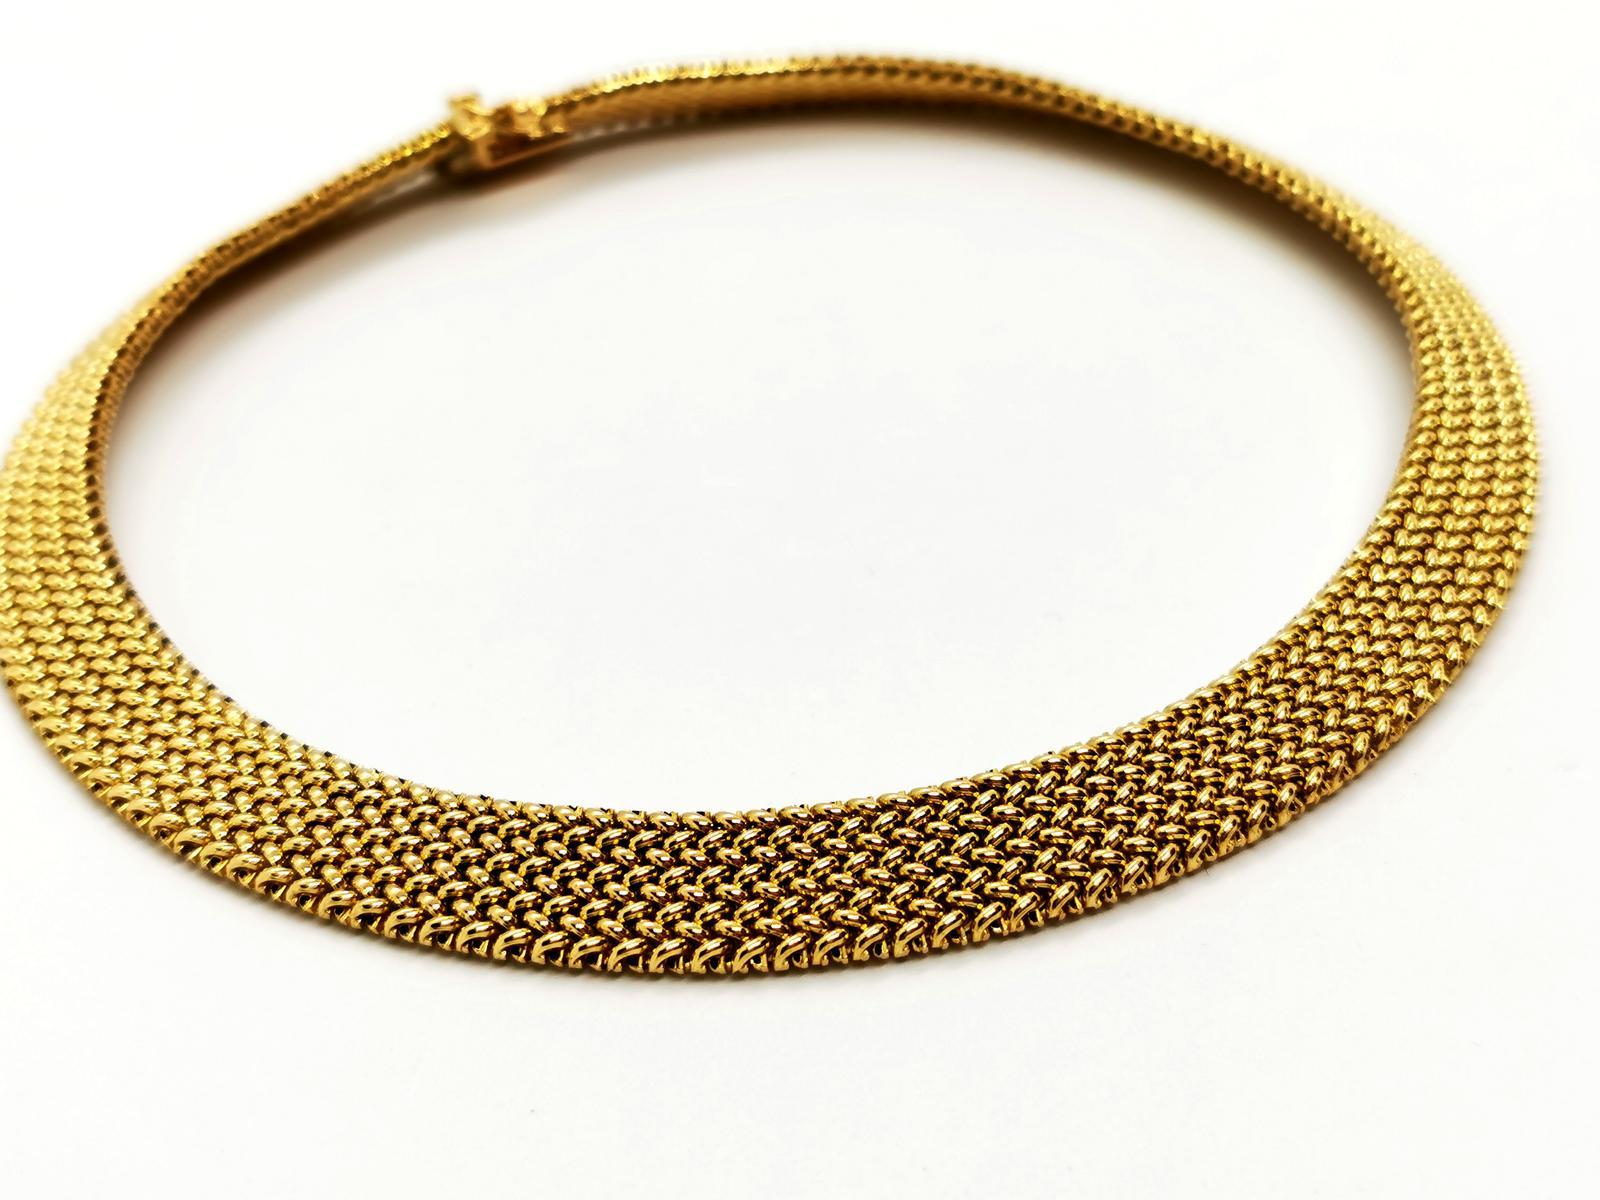 Necklace in yellow gold 750 thousandths (18 carats). Polish mesh. length: 36 cm. width: 1.14 cm. clasp tongue with two safety eights. total weight: 47.45 g. eagle head hallmark. excellent condition
